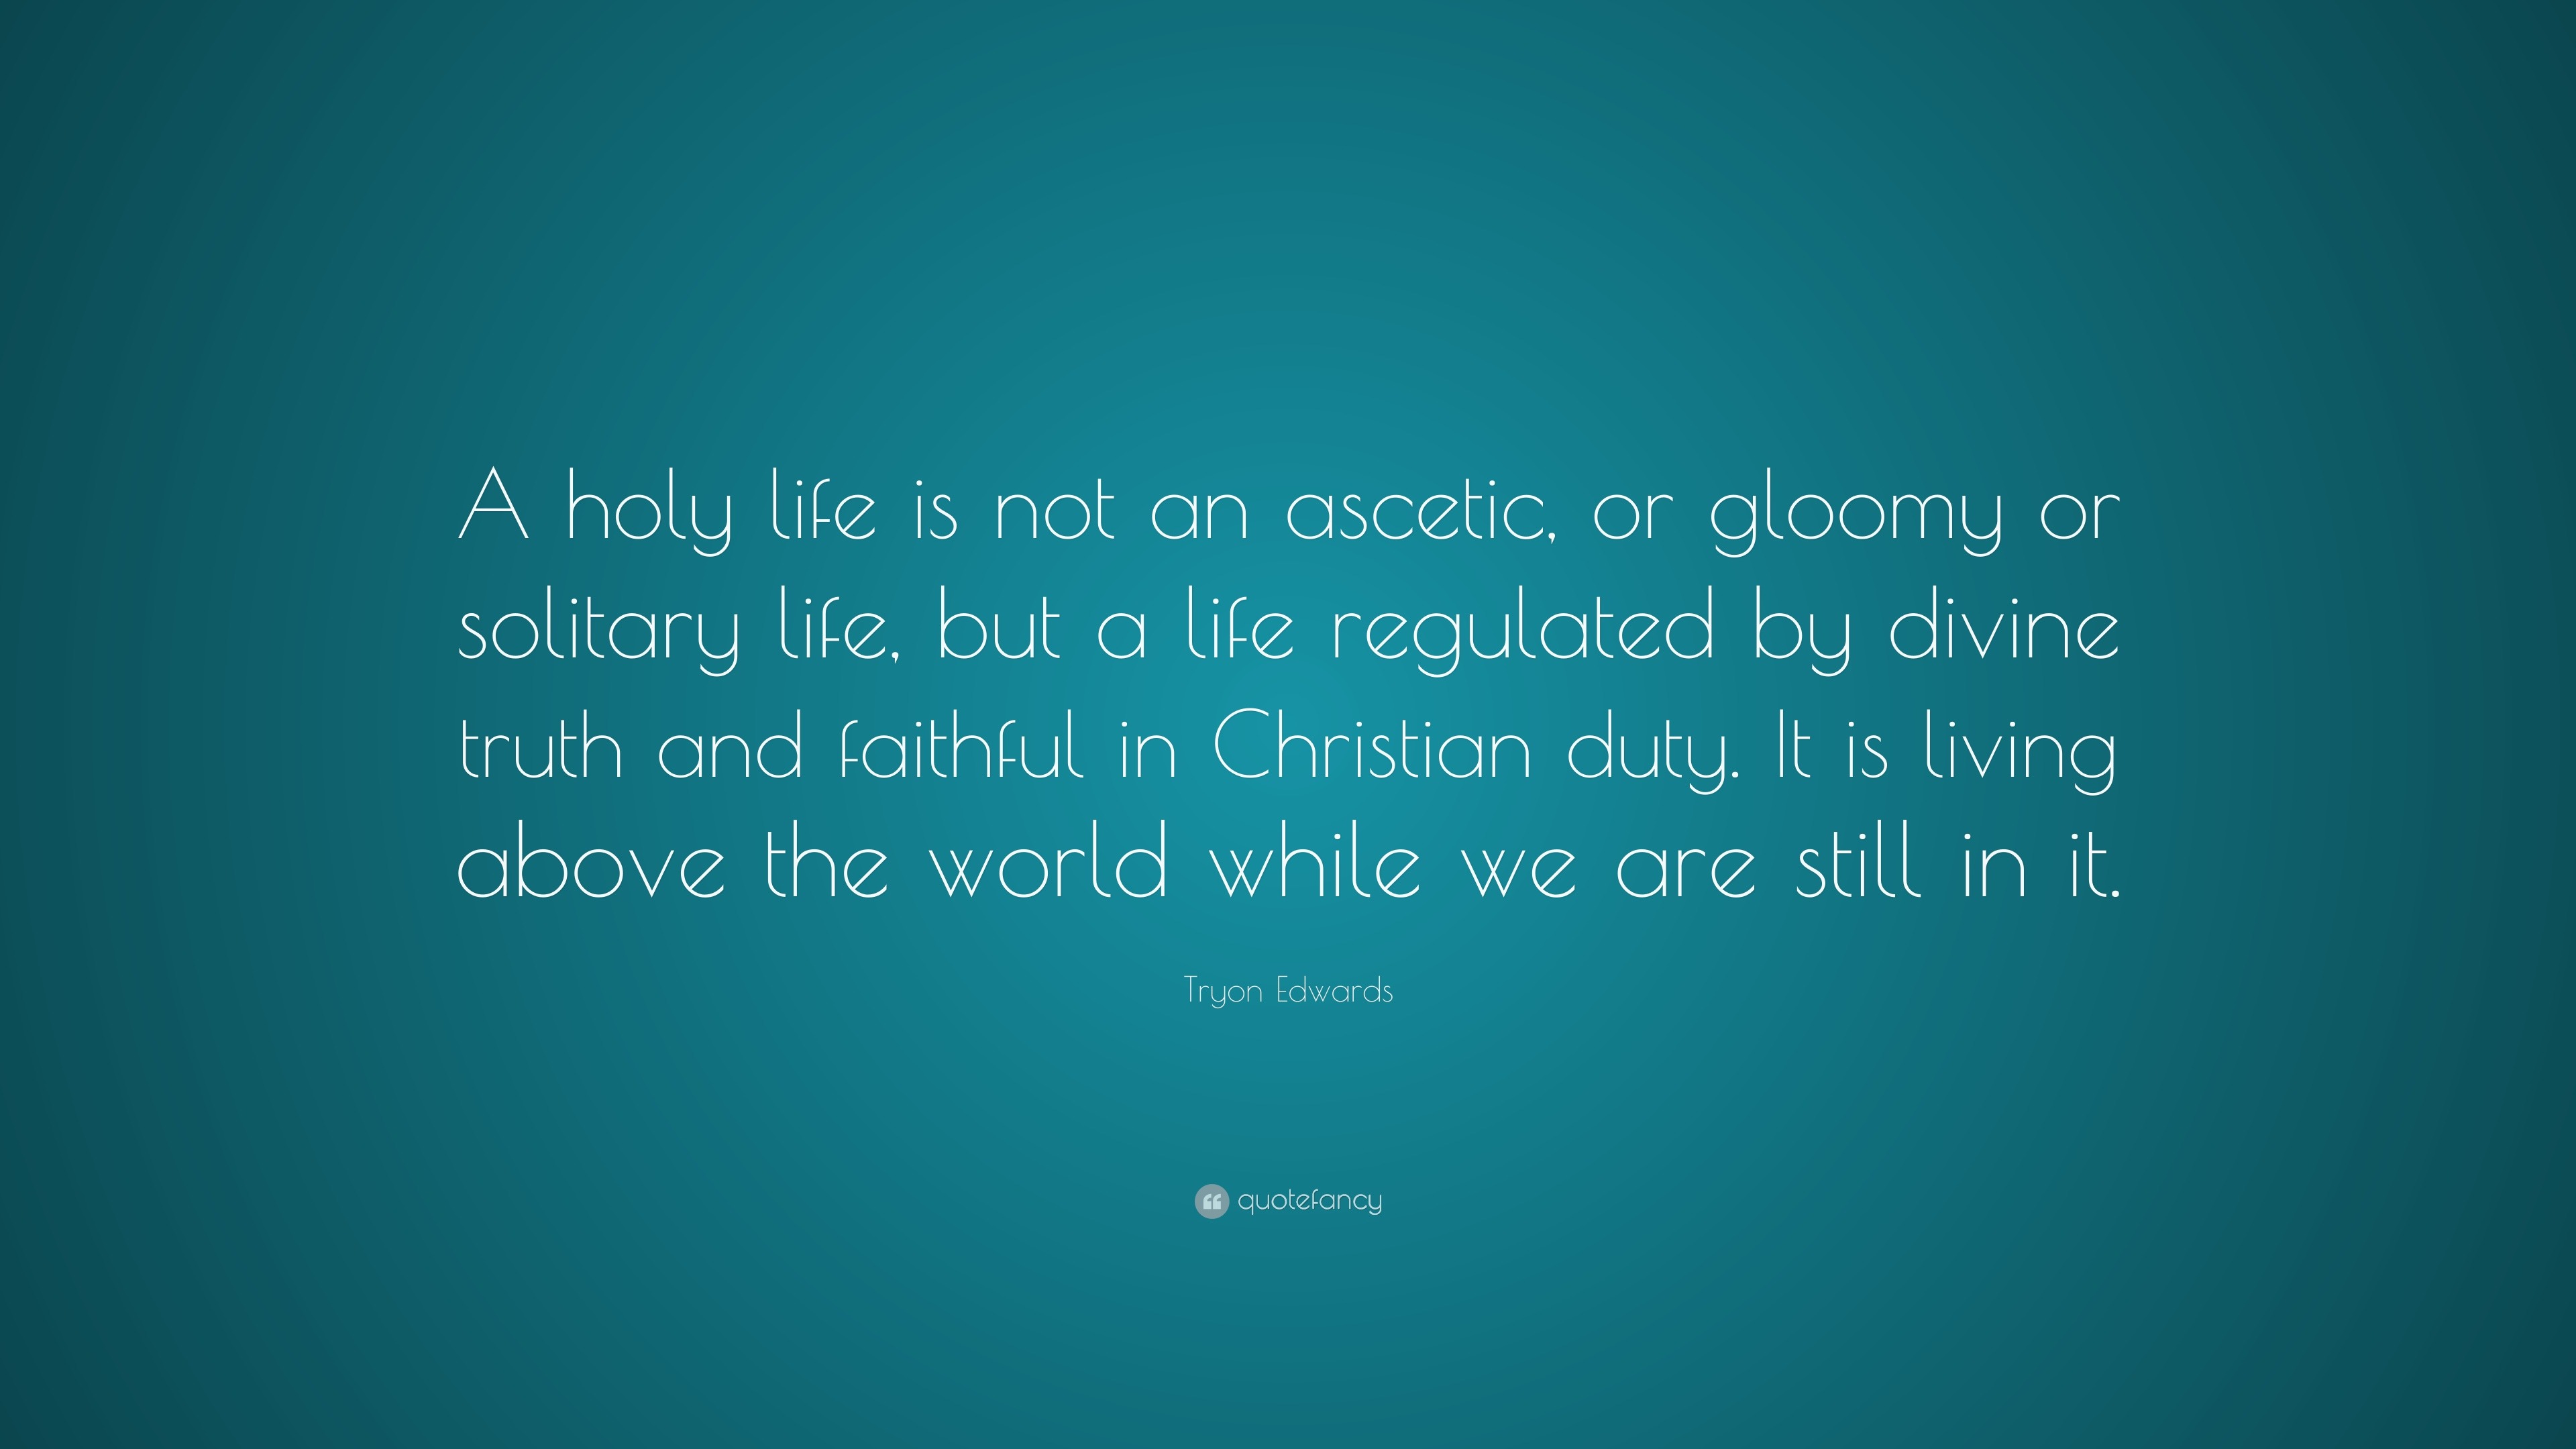 Tryon Edwards Quote “A holy life is not an ascetic or gloomy or